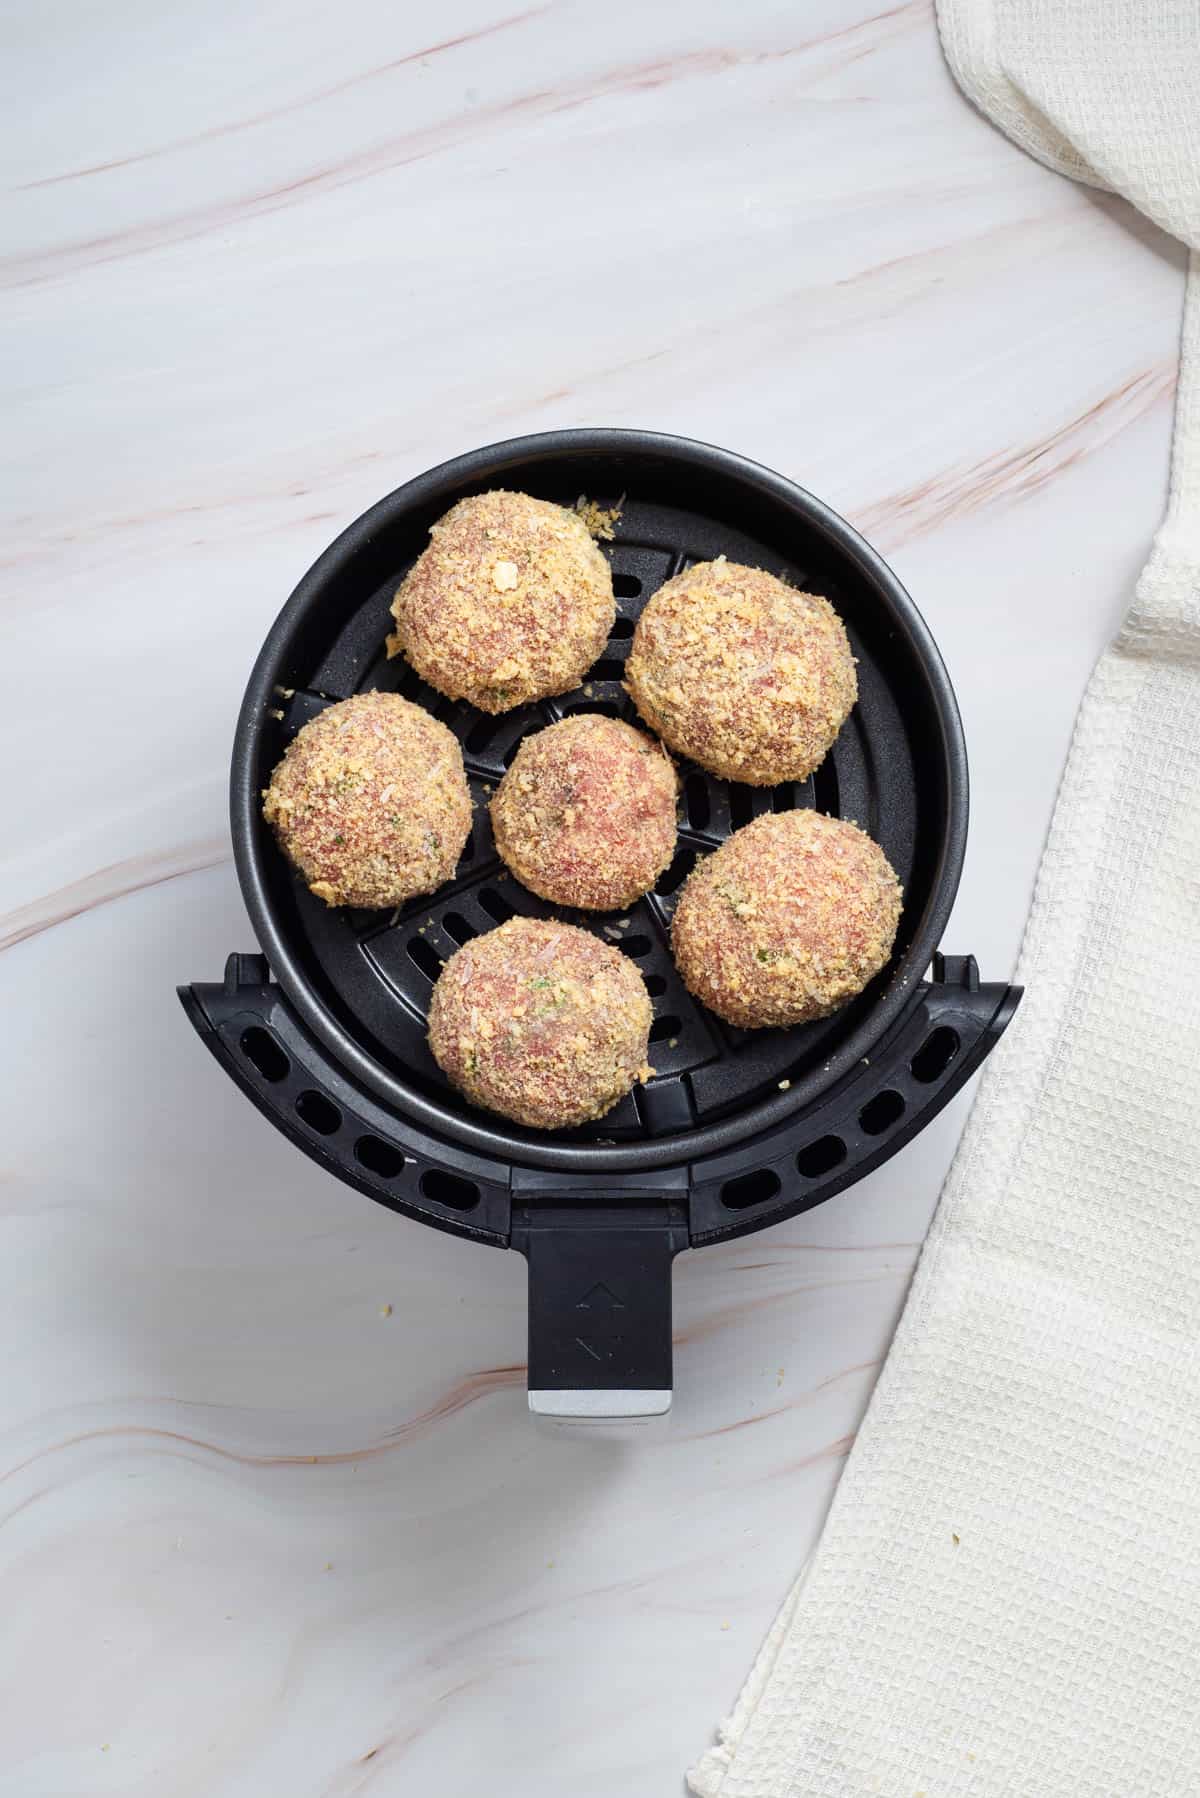 Six large meatballs in an air fryer.